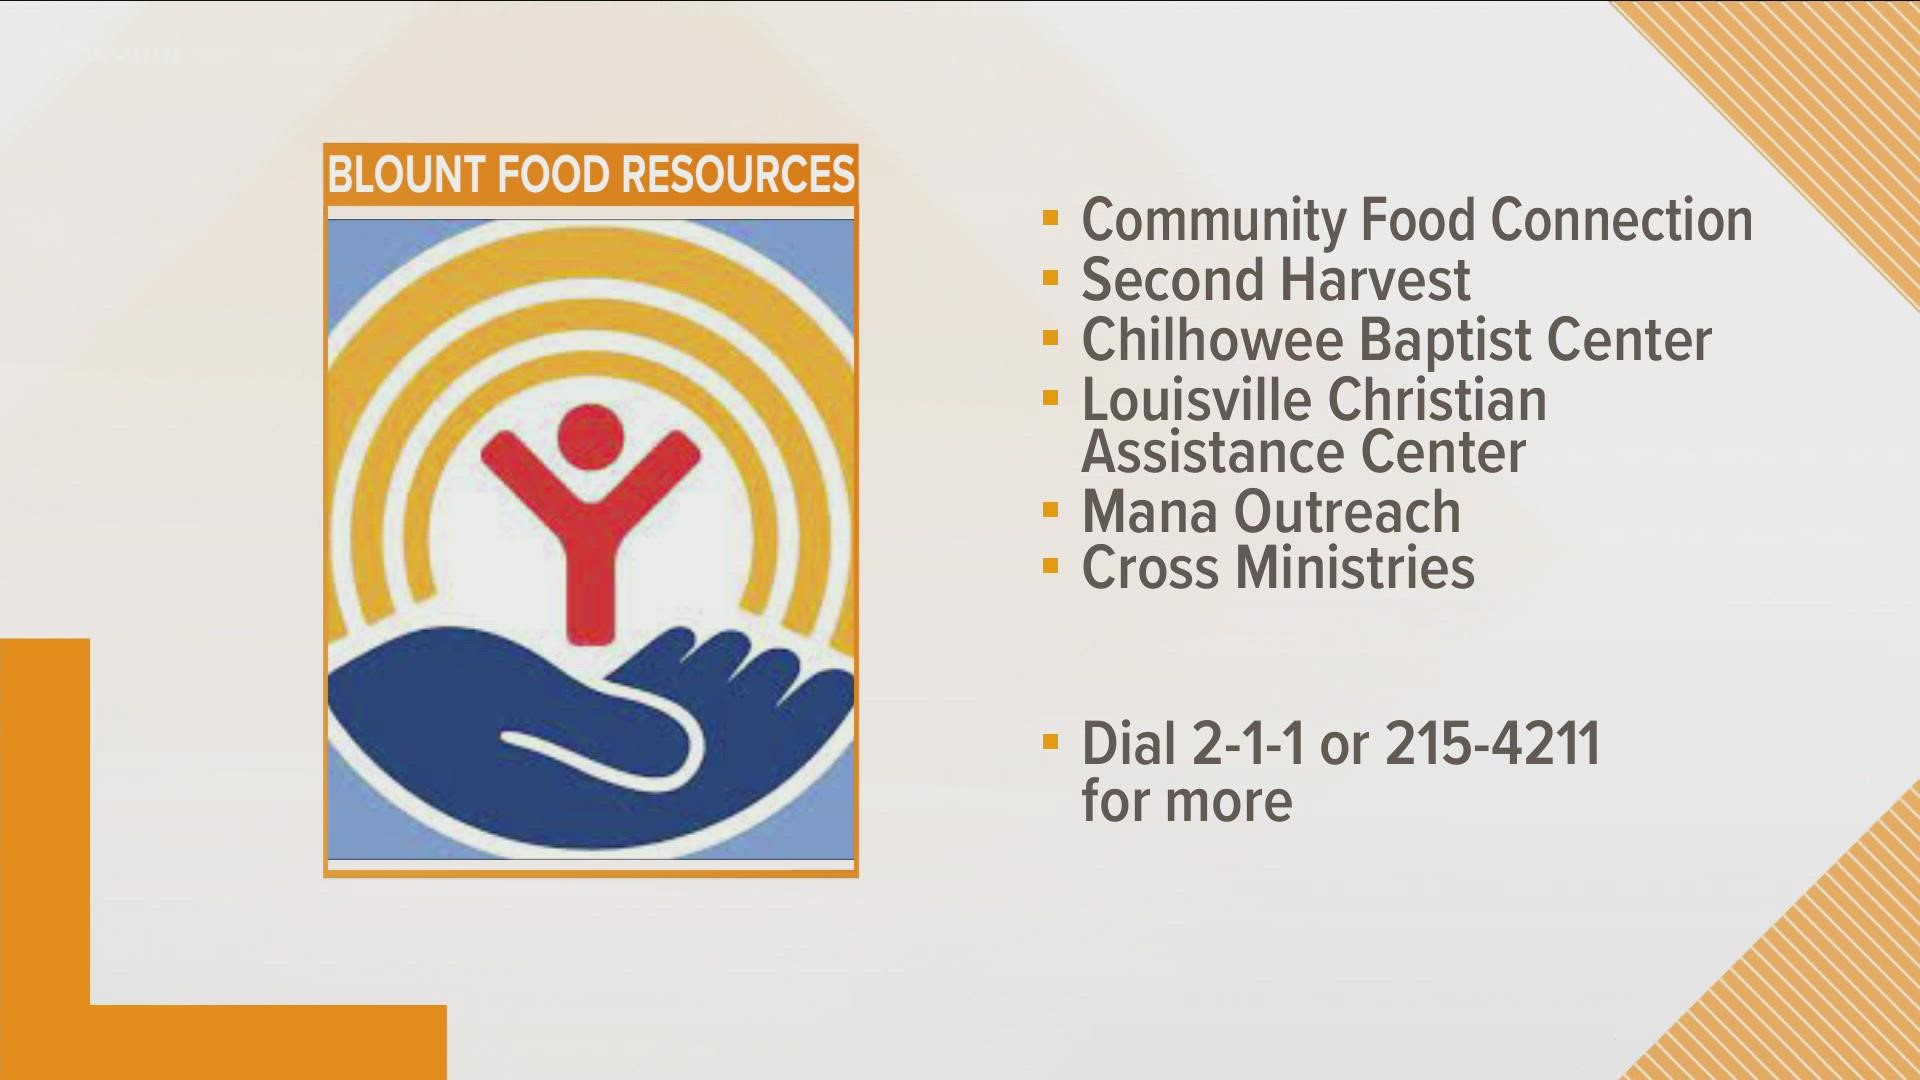 Almost 50% of households struggle with food insecurity in Blount County.